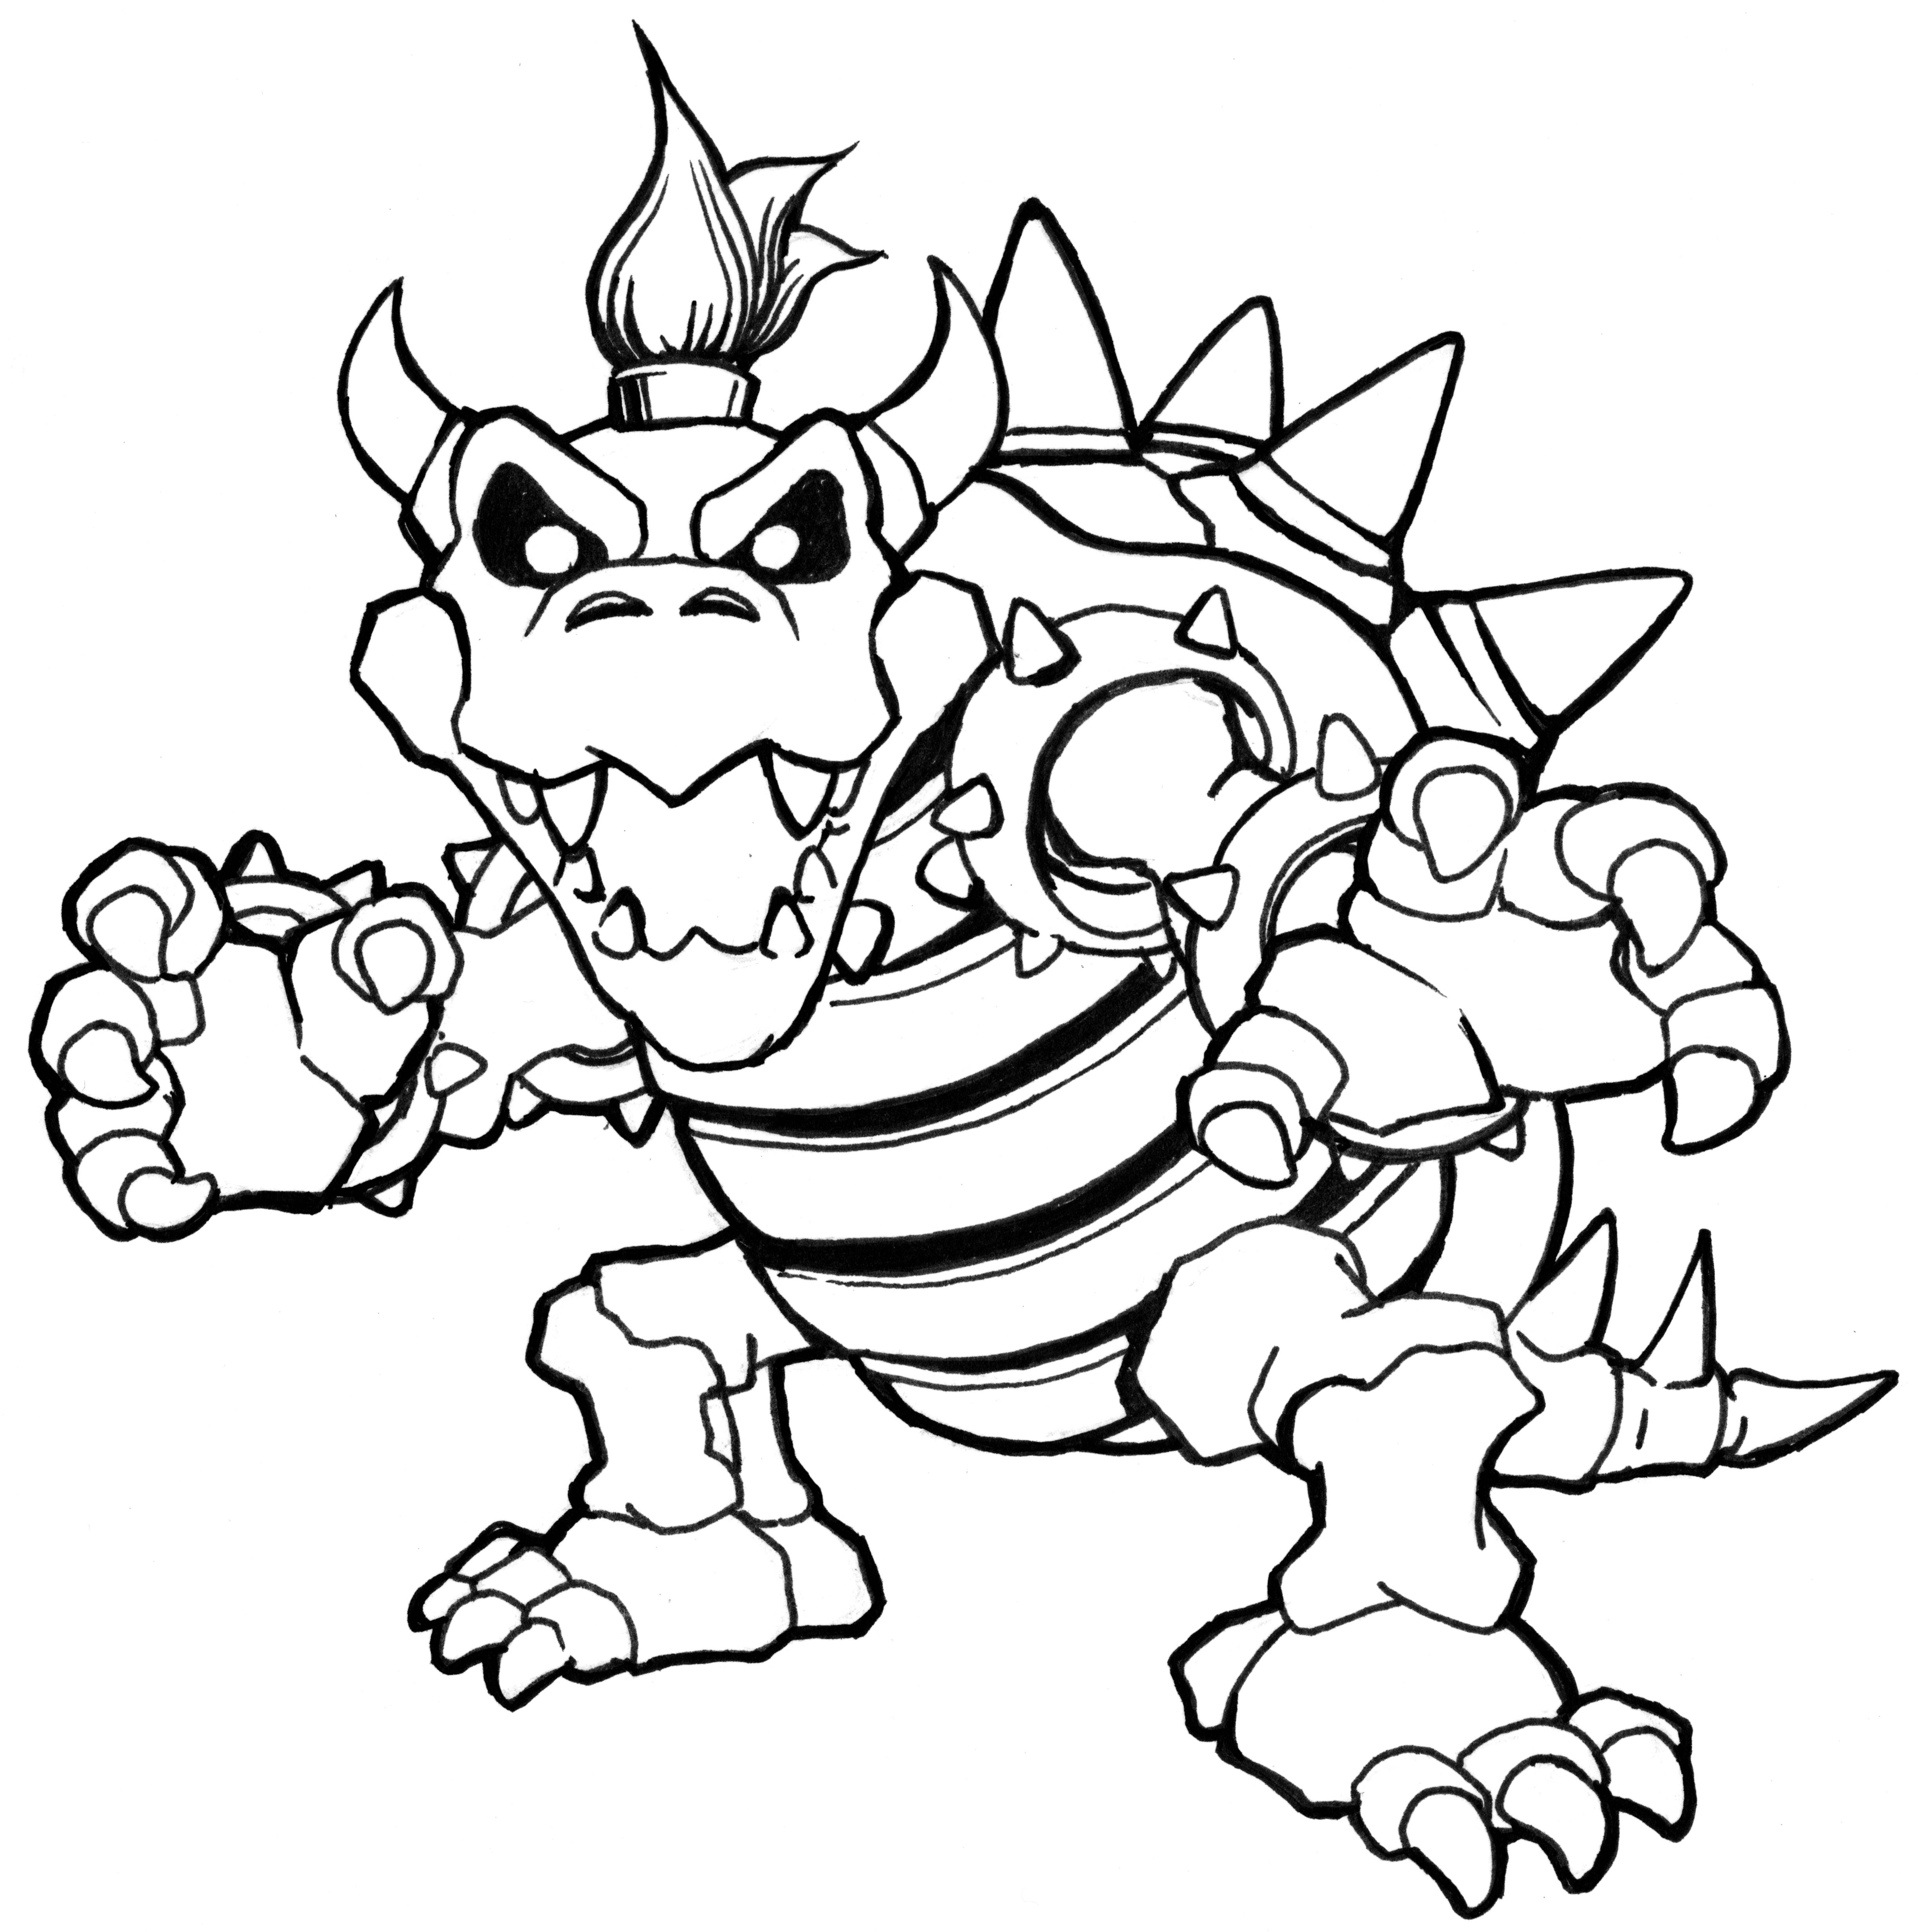 Bowser Coloring Pages Online - Coloring Home